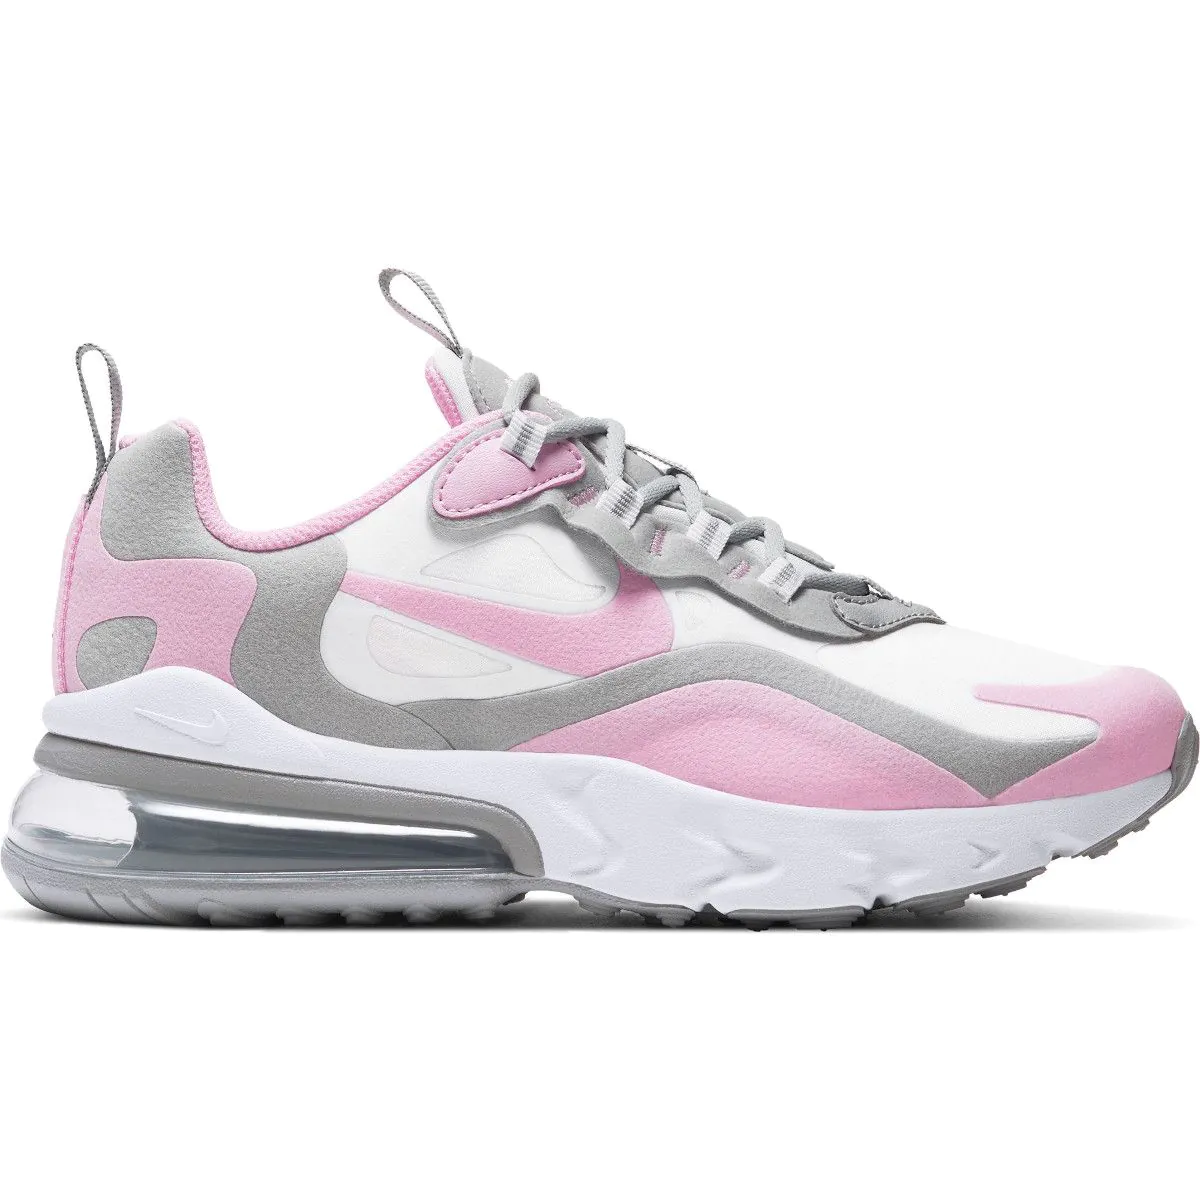 Nike Girls Air Max 270 RT Shoes Black/White/Hyper Pink Size 02.0